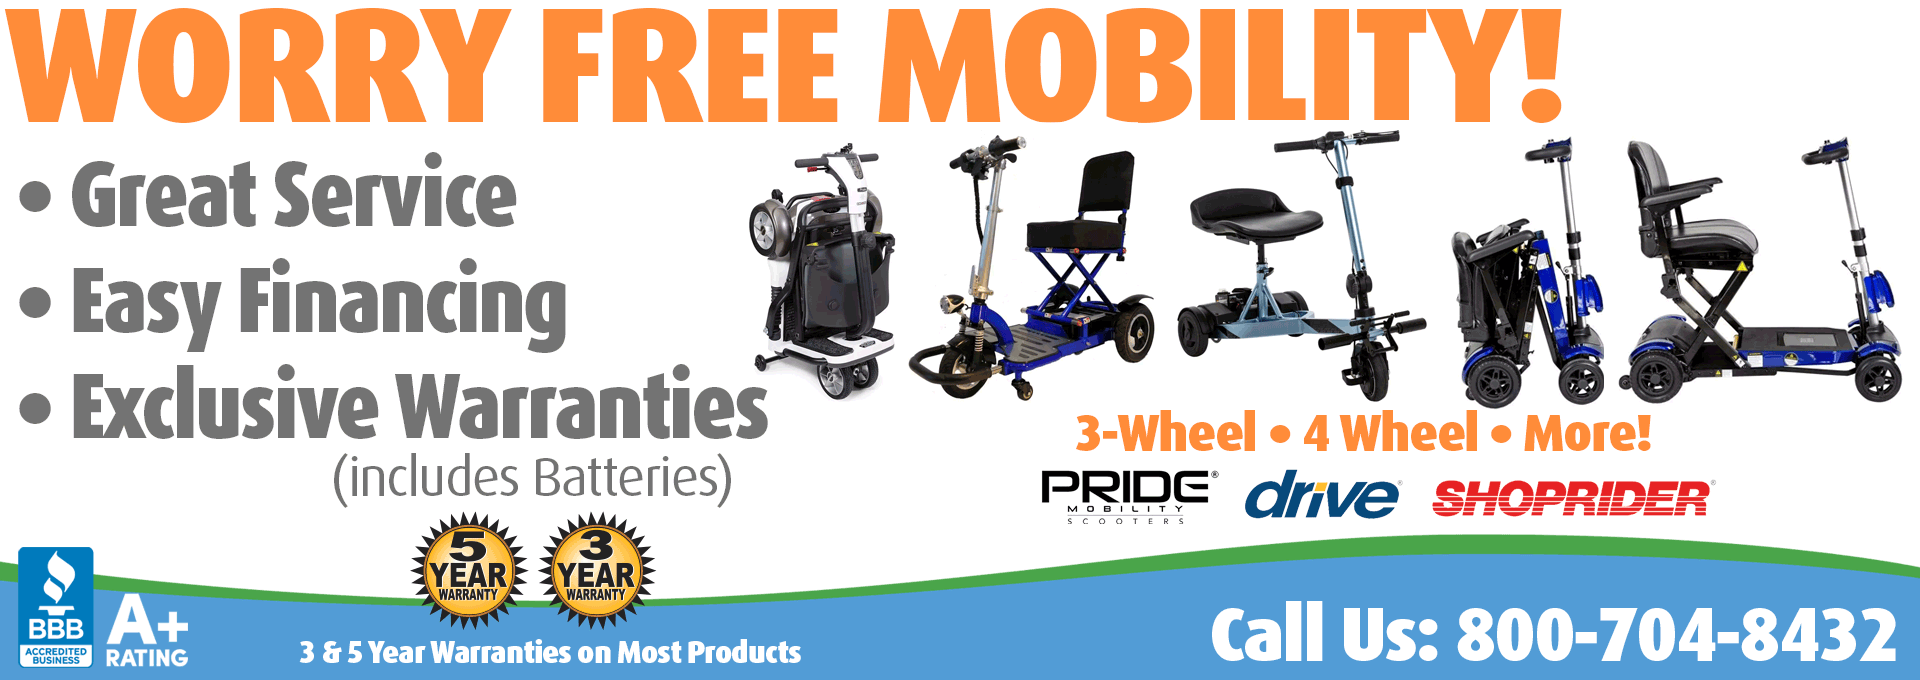 Living Well Stores: Folding Mobility Scooters by Pride Mobility, Drive Medical, Shoprider, Triaxe, EMobility and more